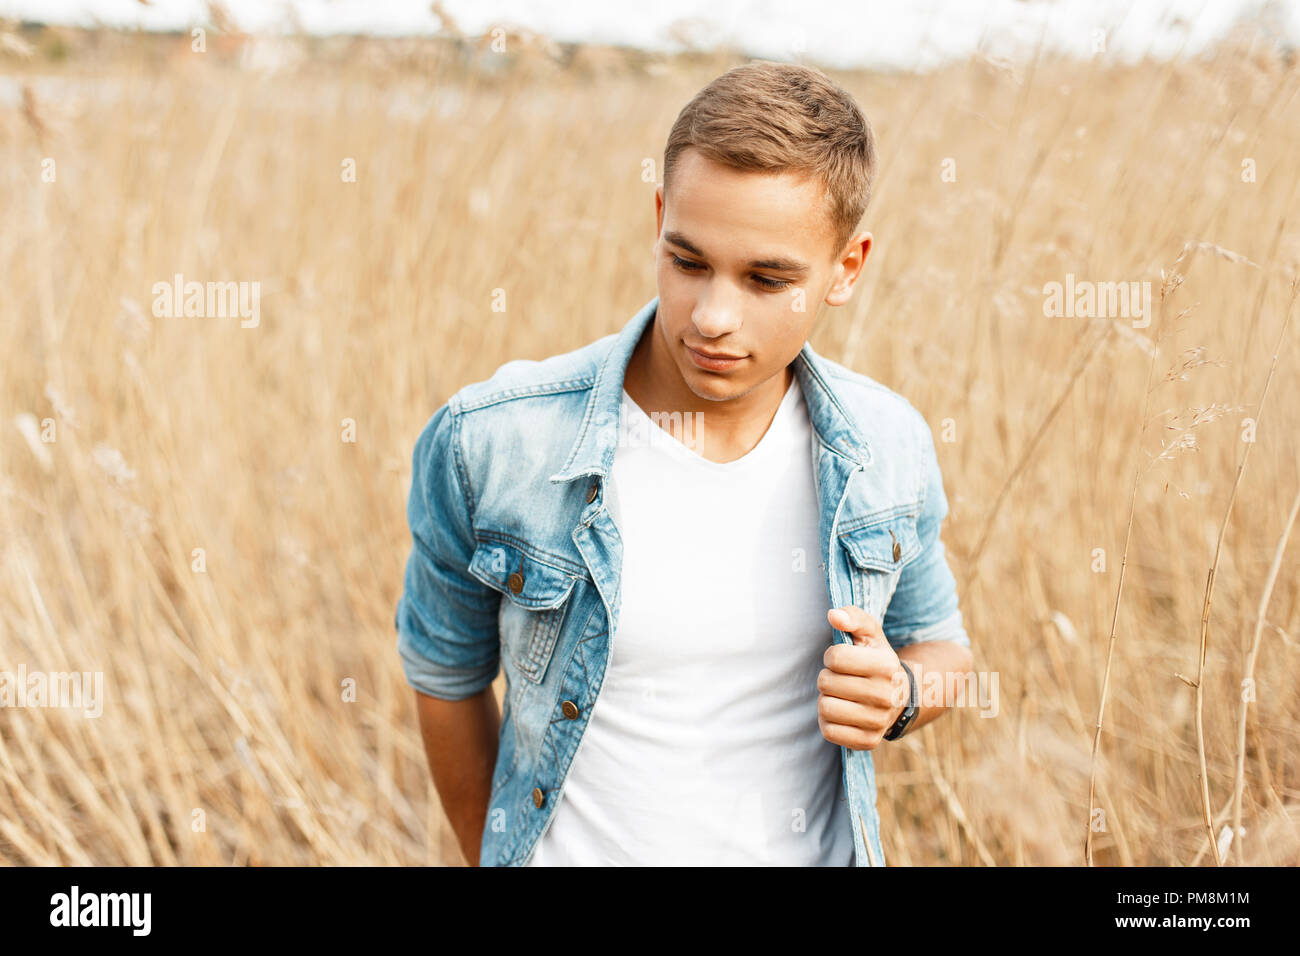 Handsome young man in a jeans jacket and a white t-shirt in grass outdoors Stock Photo